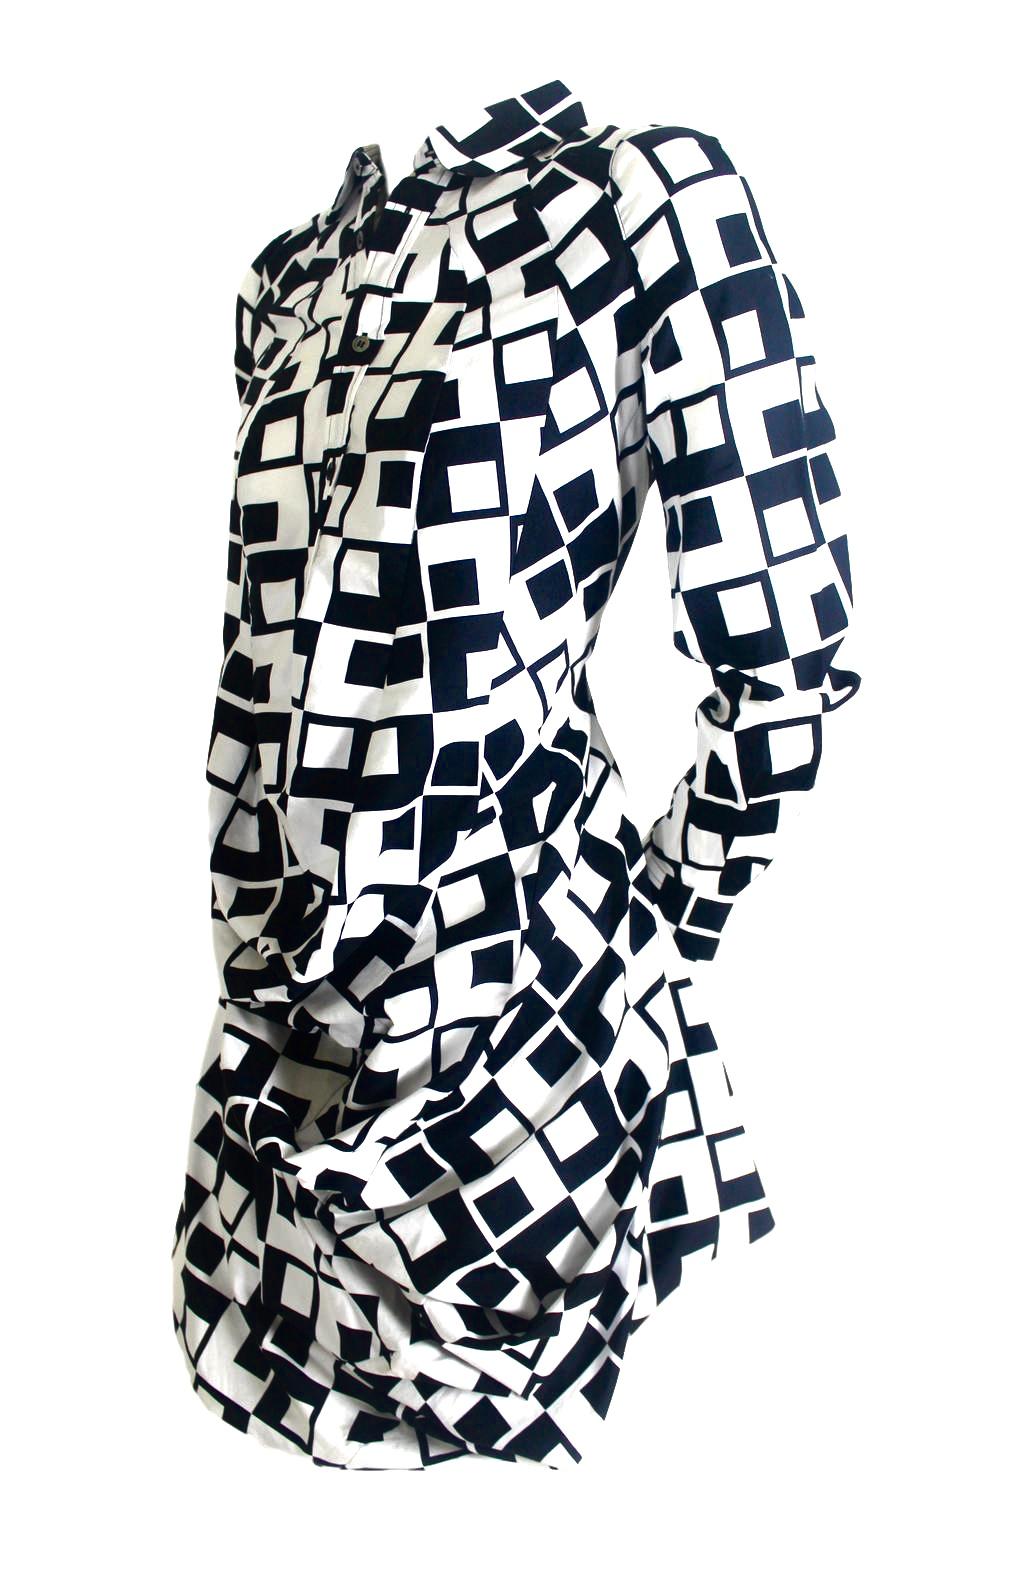 Comme des Garcons Junya Watanabe Geometric Dress AD 2009 For Sale 3